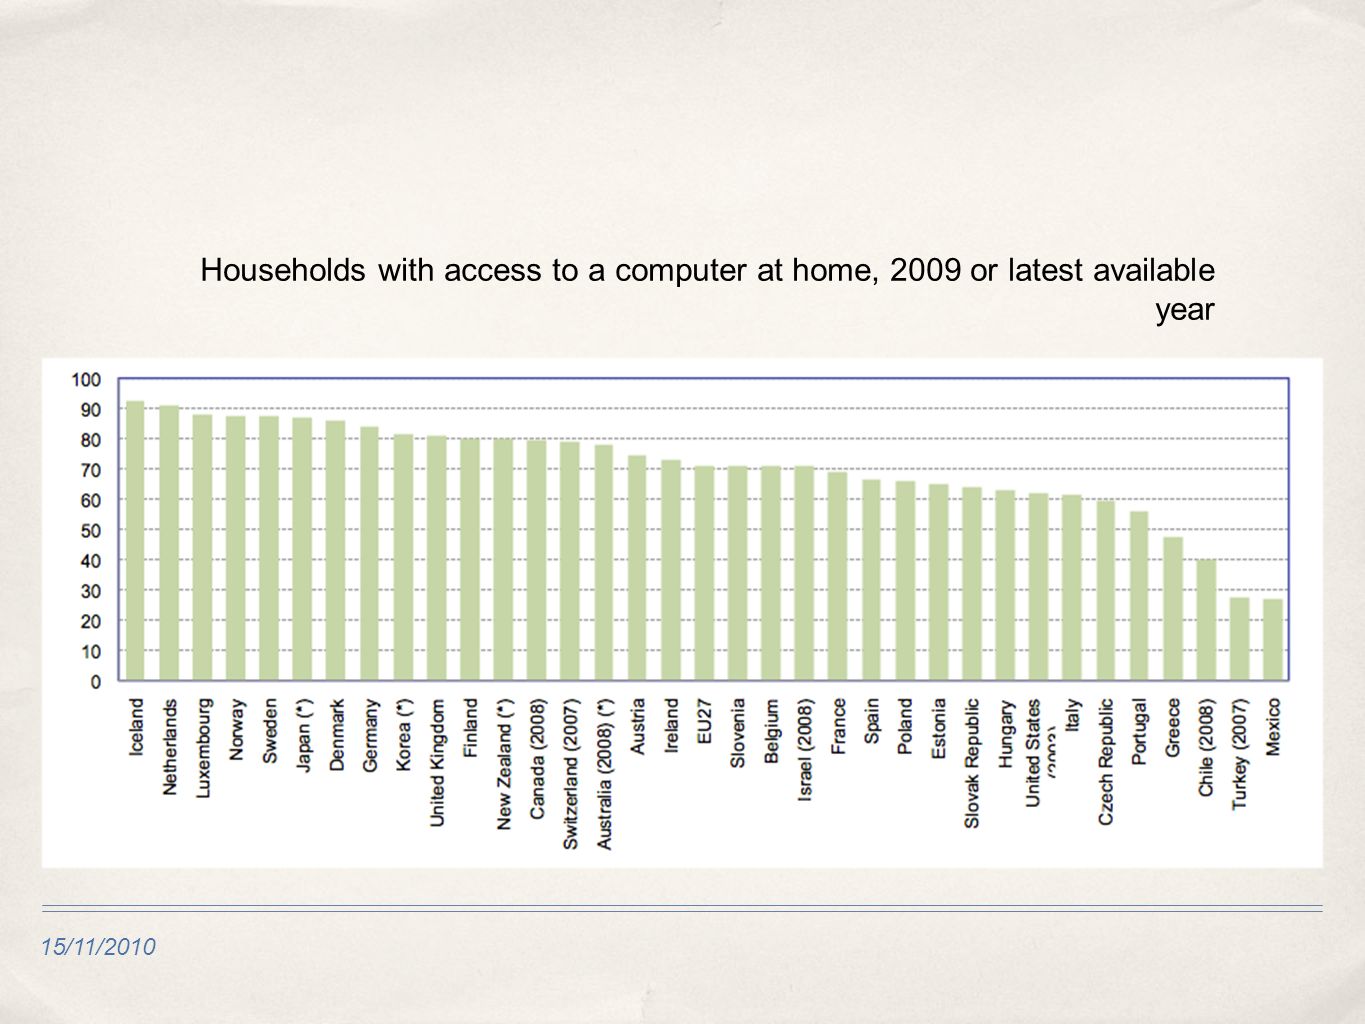 15/11/2010 Households with access to a computer at home, 2009 or latest available year